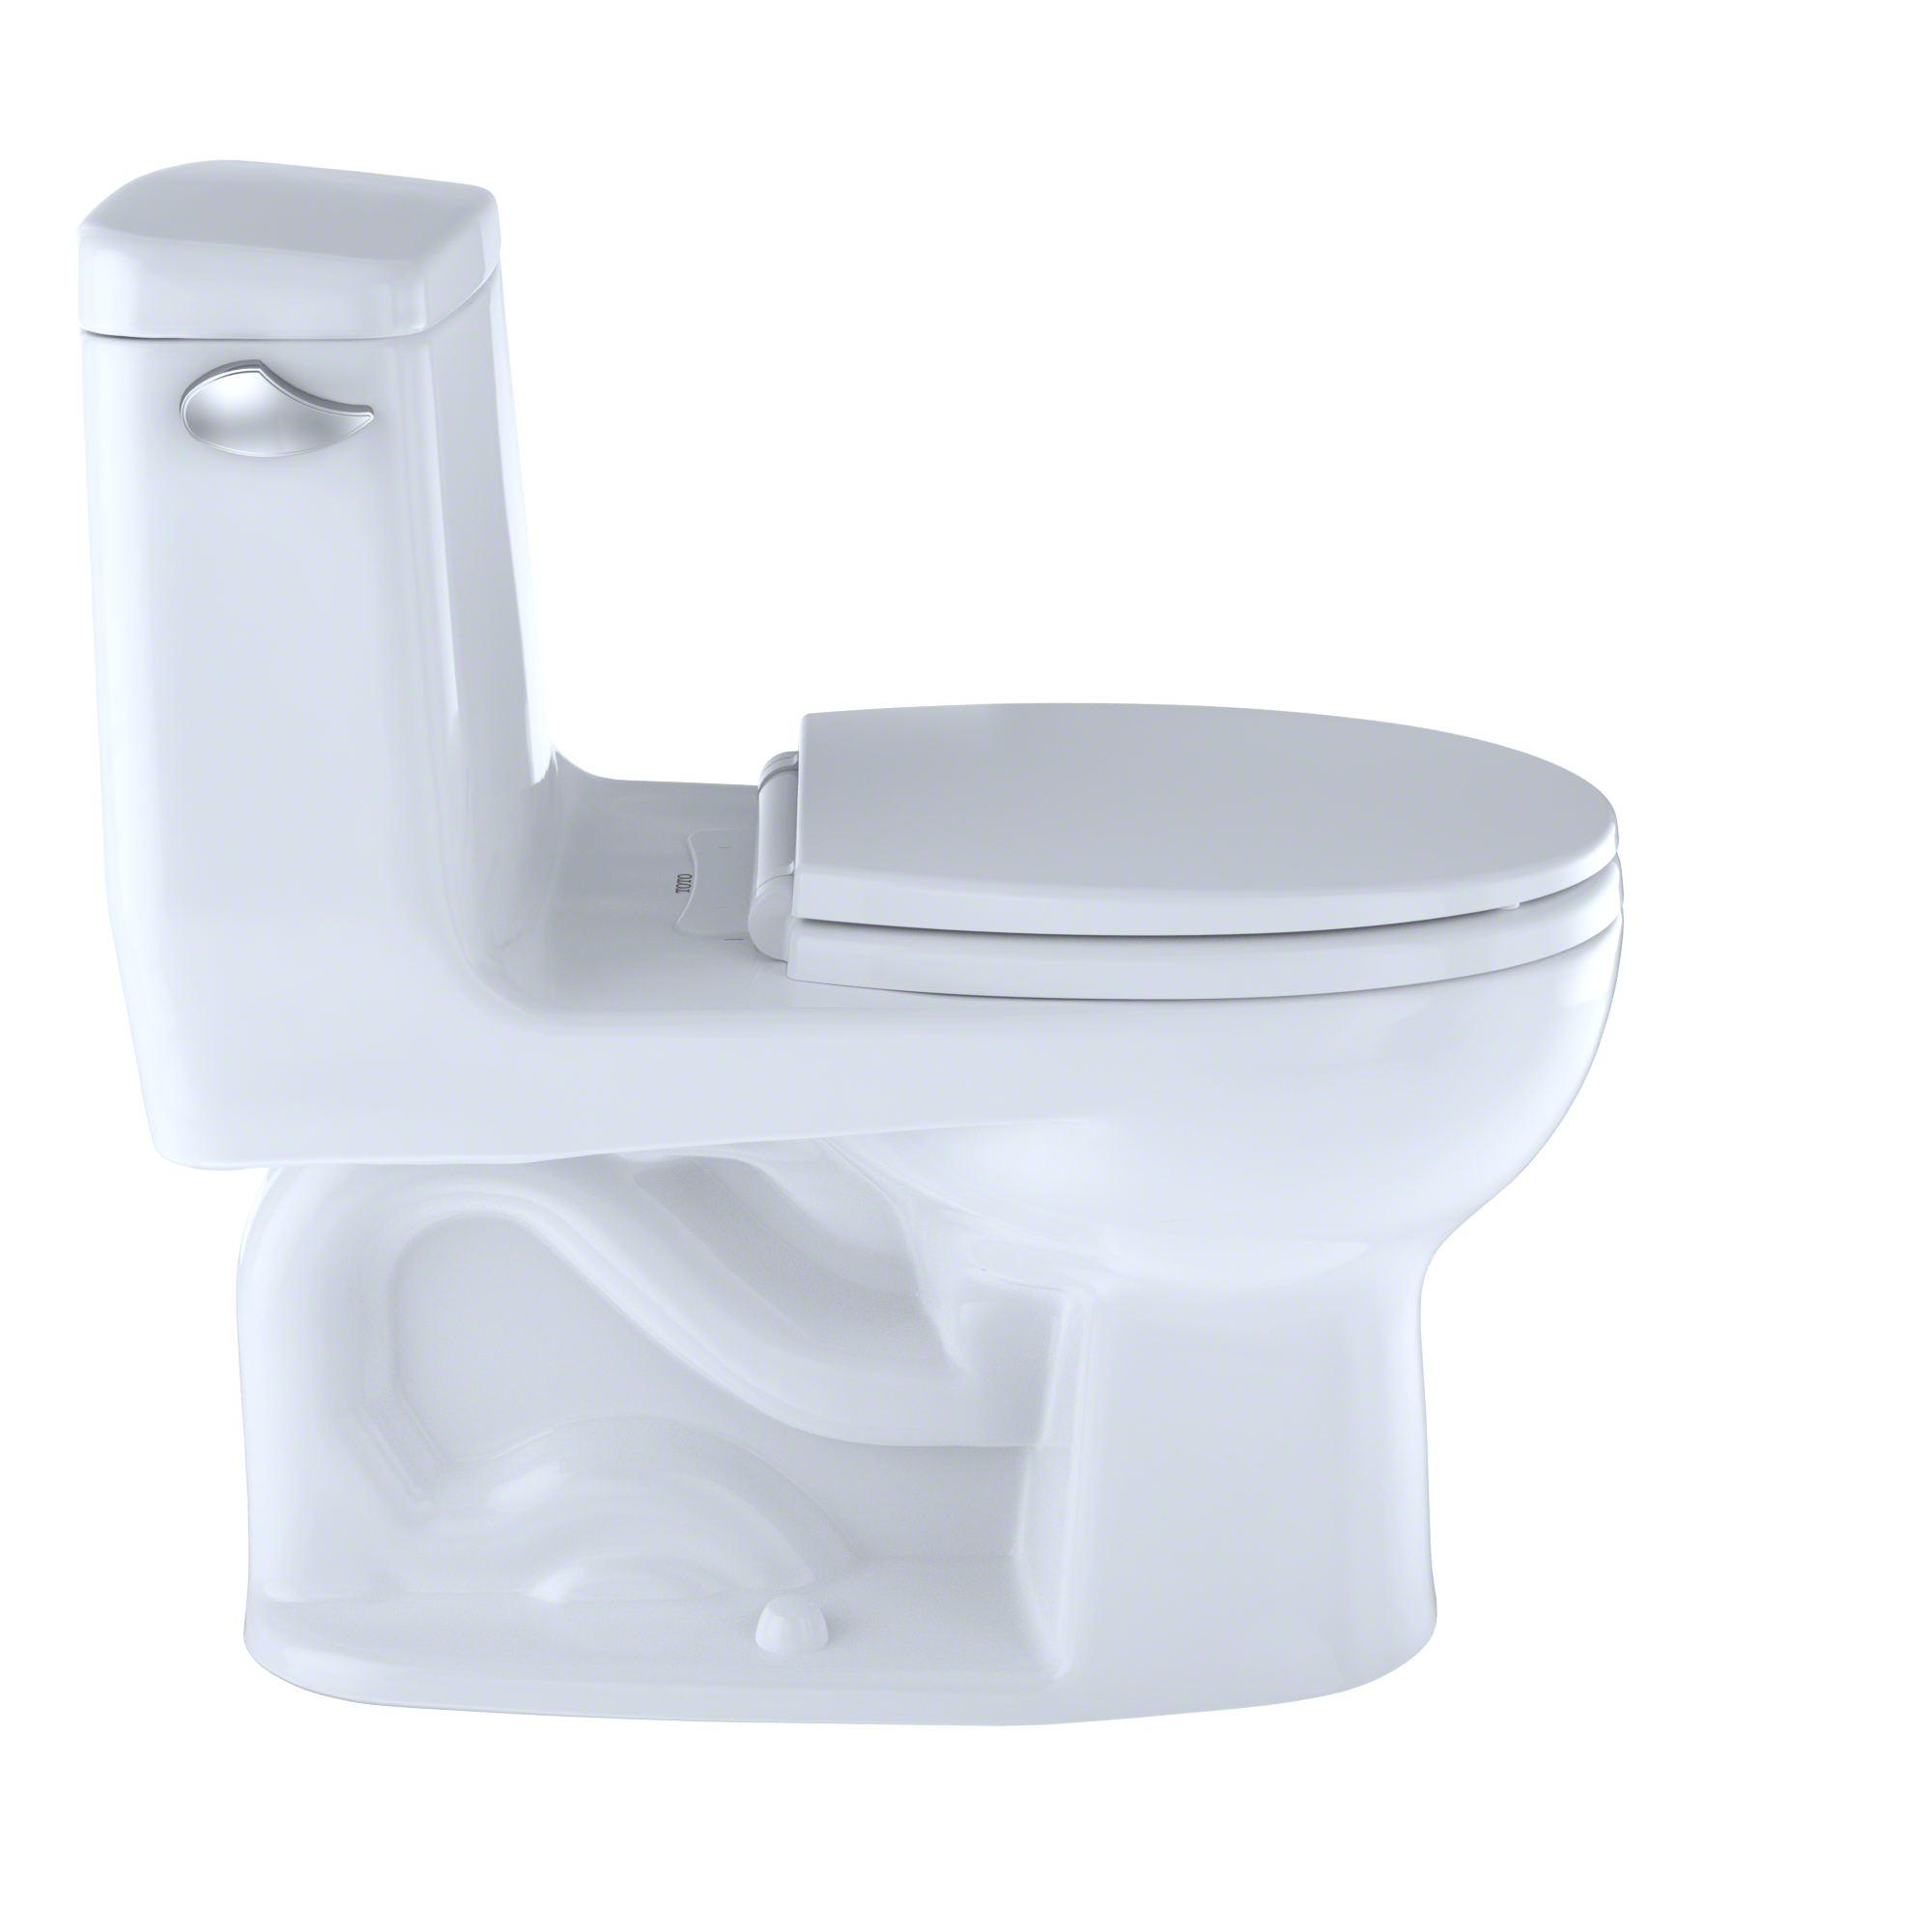 Toto Ms853113s Ultramax 1.6 Gpf One Piece Round Toilet - - Cotton - image 5 of 5